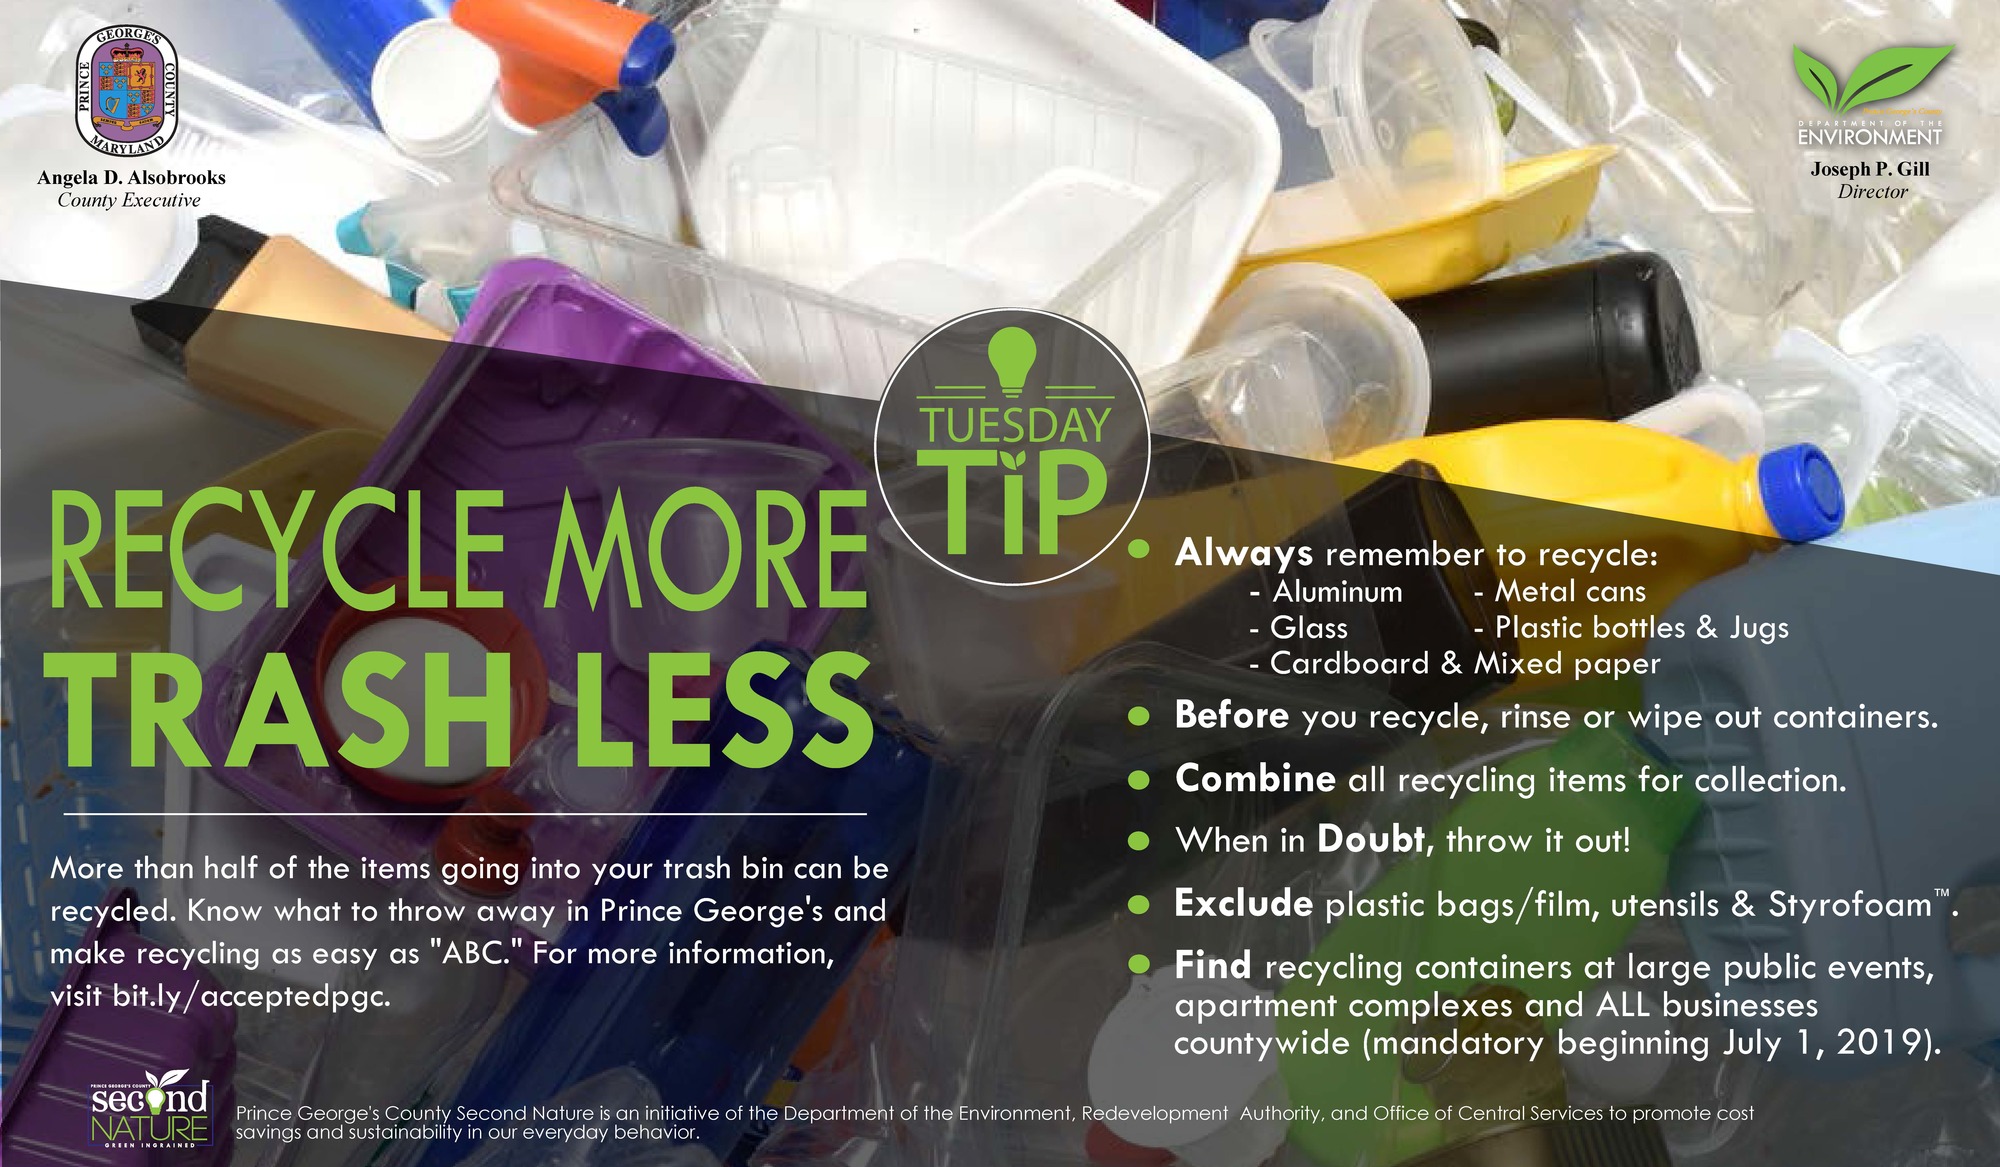 Tues tip 6.25.19 recycle more